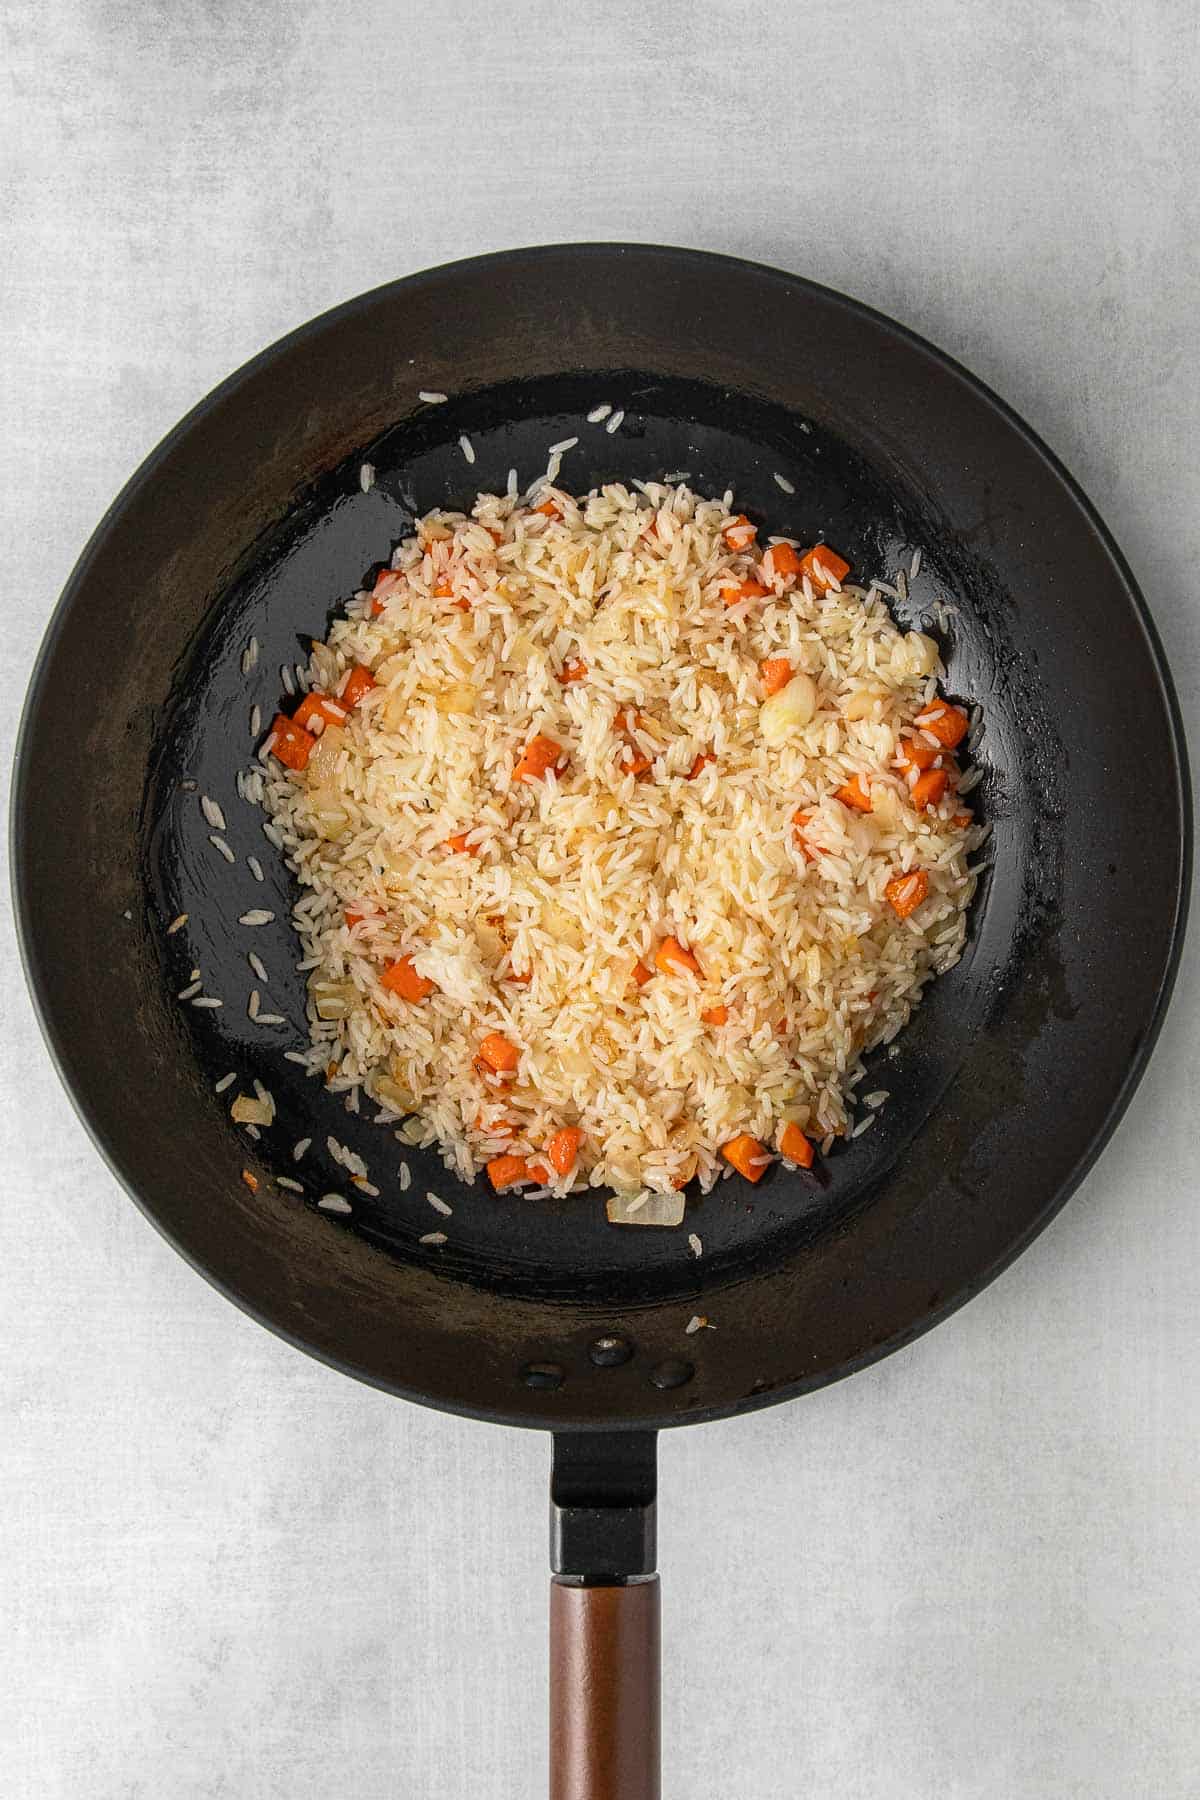 Large black skillet with rice and diced carrots cooking.